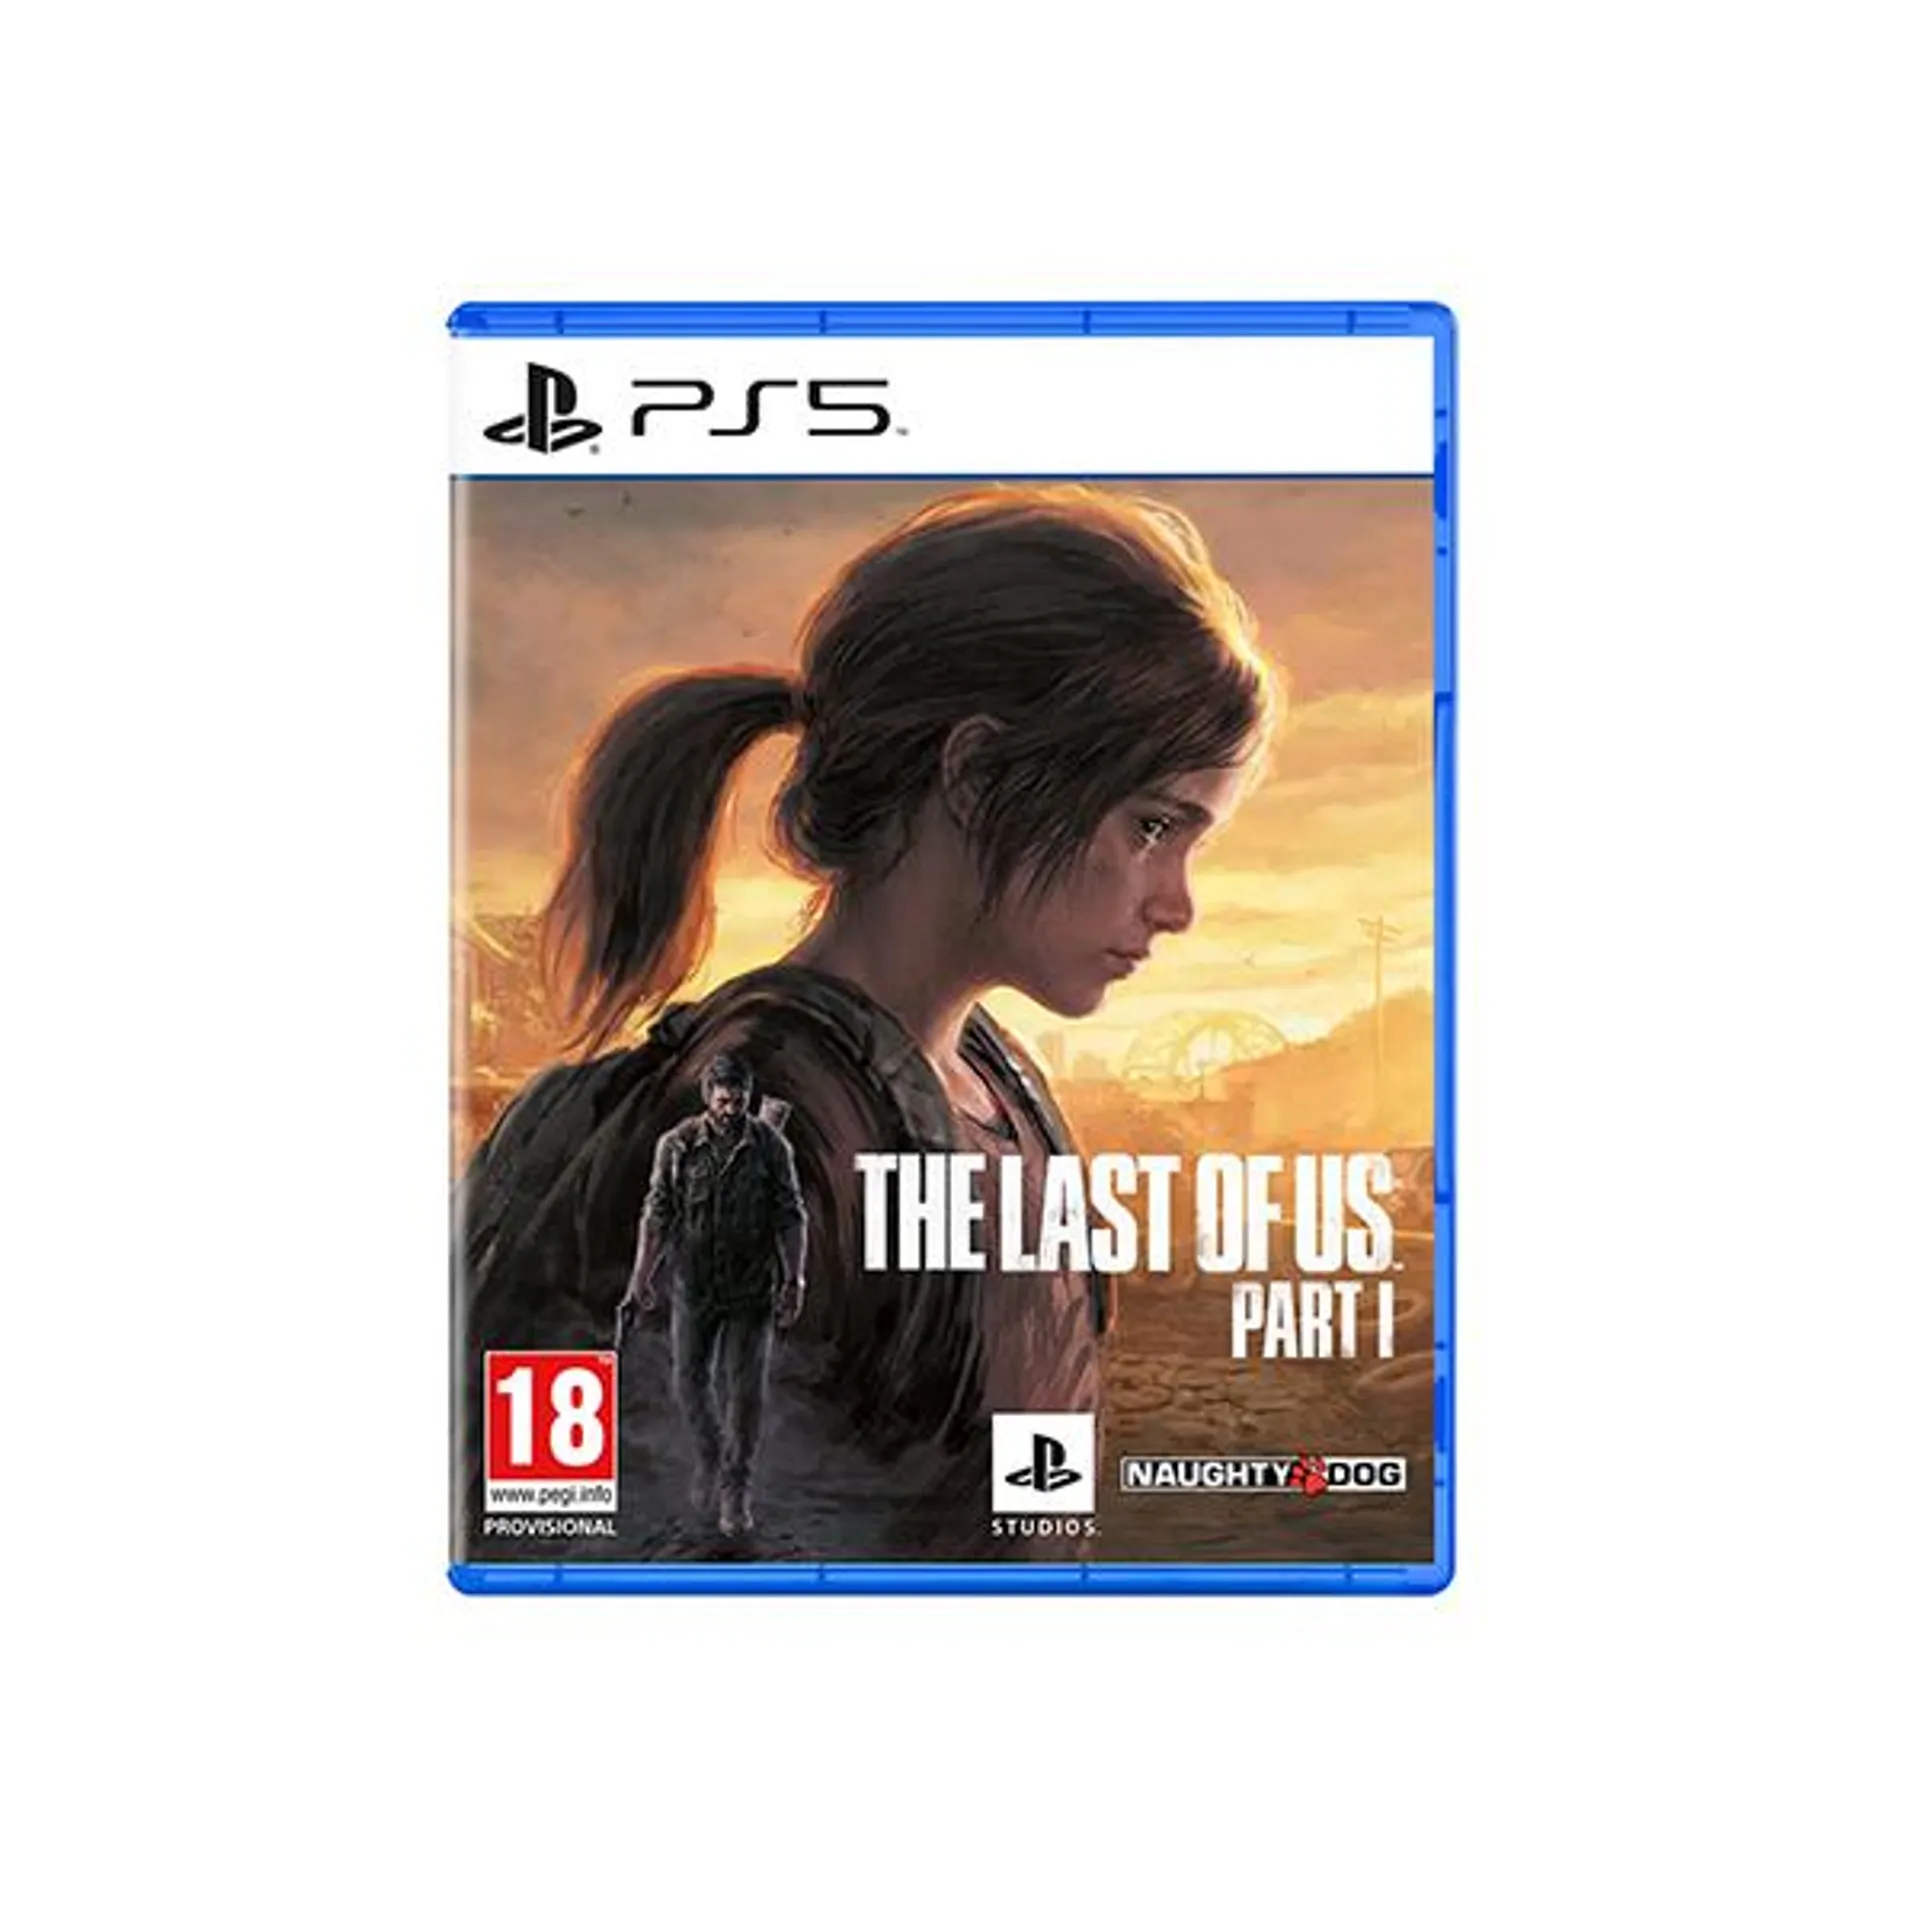 The Last of Us Part I for PS5